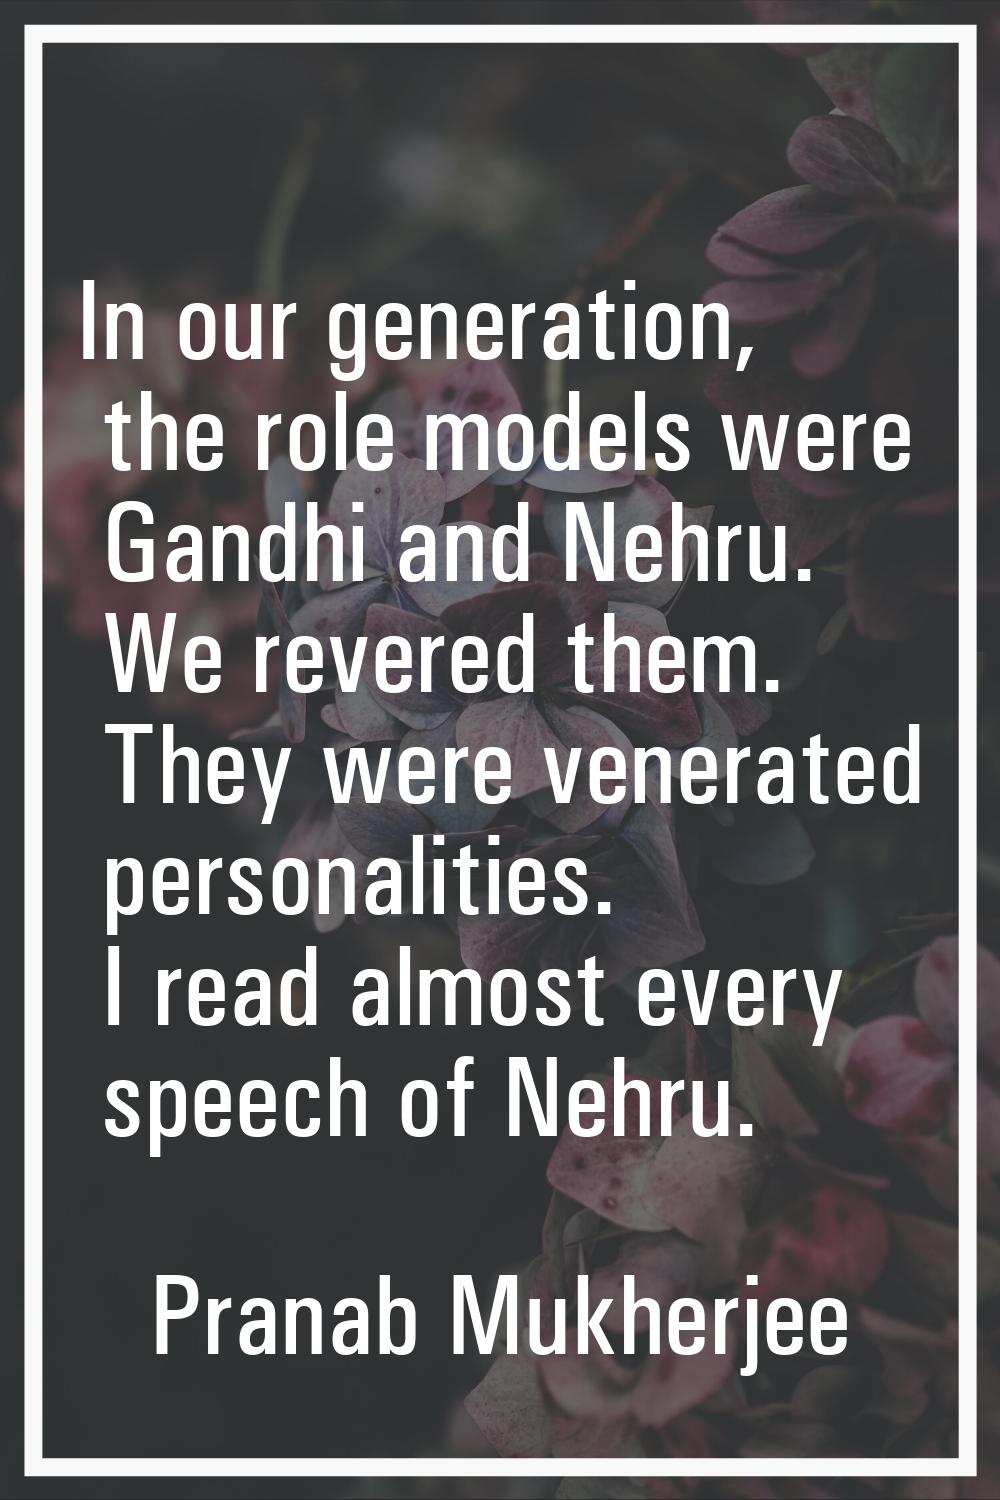 In our generation, the role models were Gandhi and Nehru. We revered them. They were venerated pers